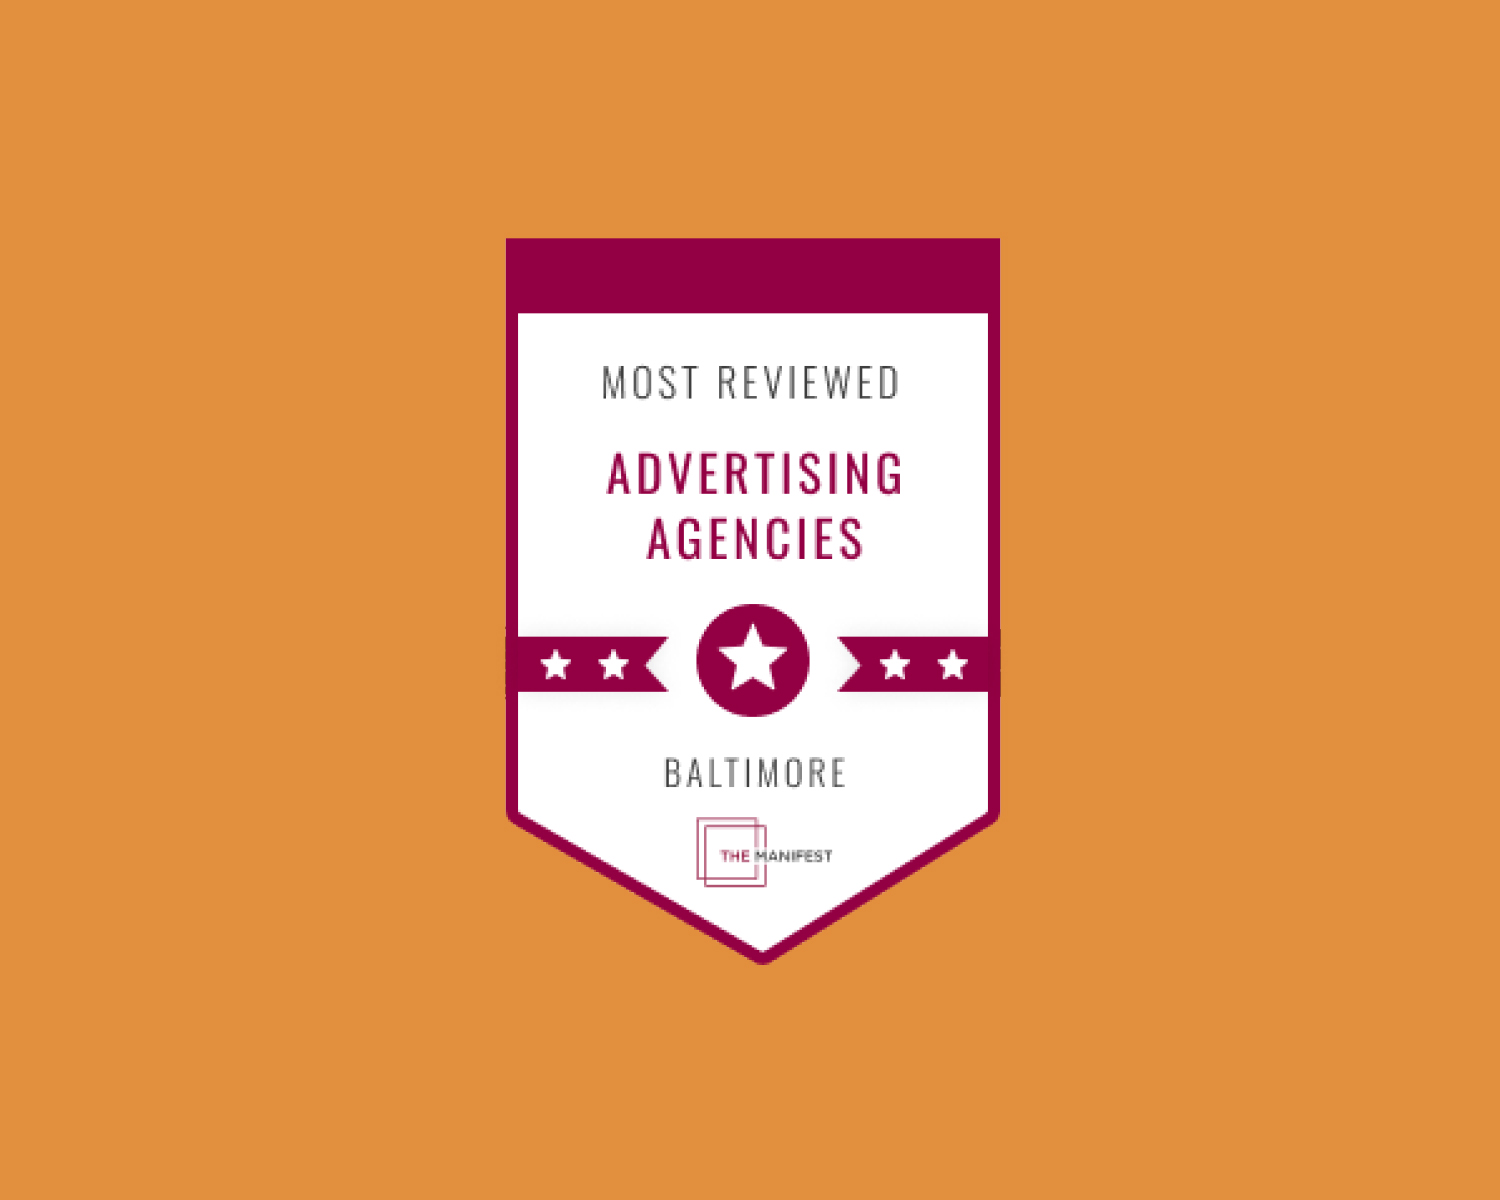 GKV Recognized as Baltimore’s Best Reviewed Advertising Agency - GKV